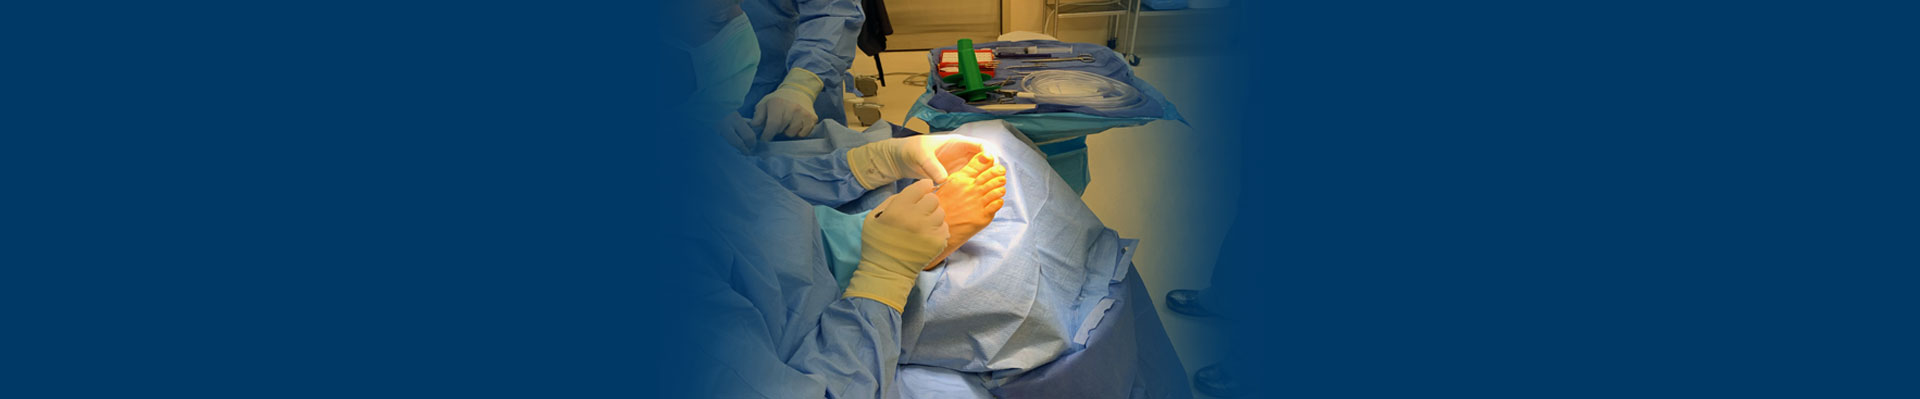 Banner picture if a Medical Surgeon about to do surgery on a patient's foot.